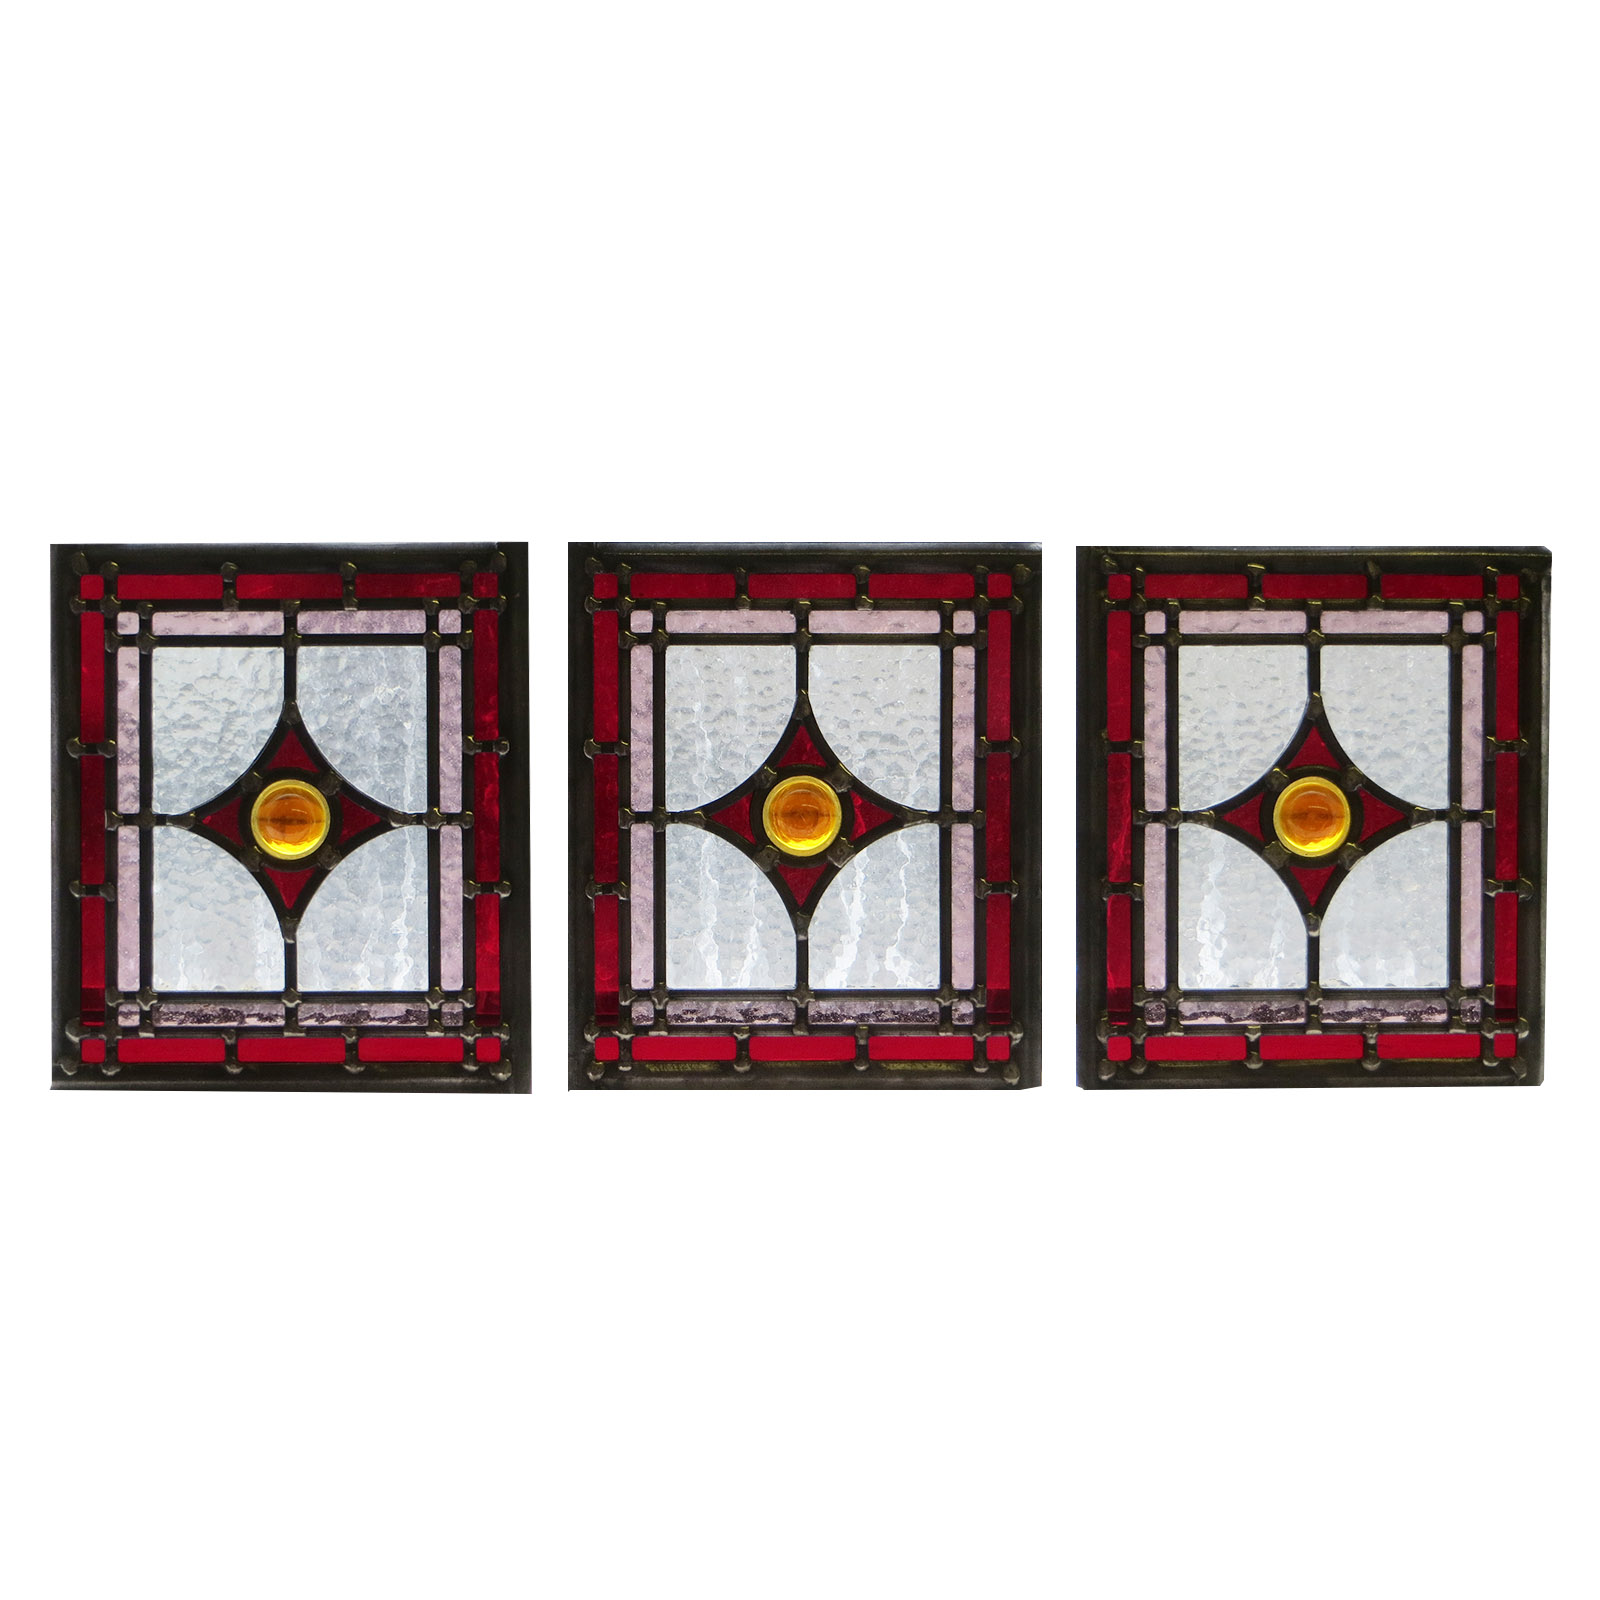 Intricate Art Deco Stained Glass Panels